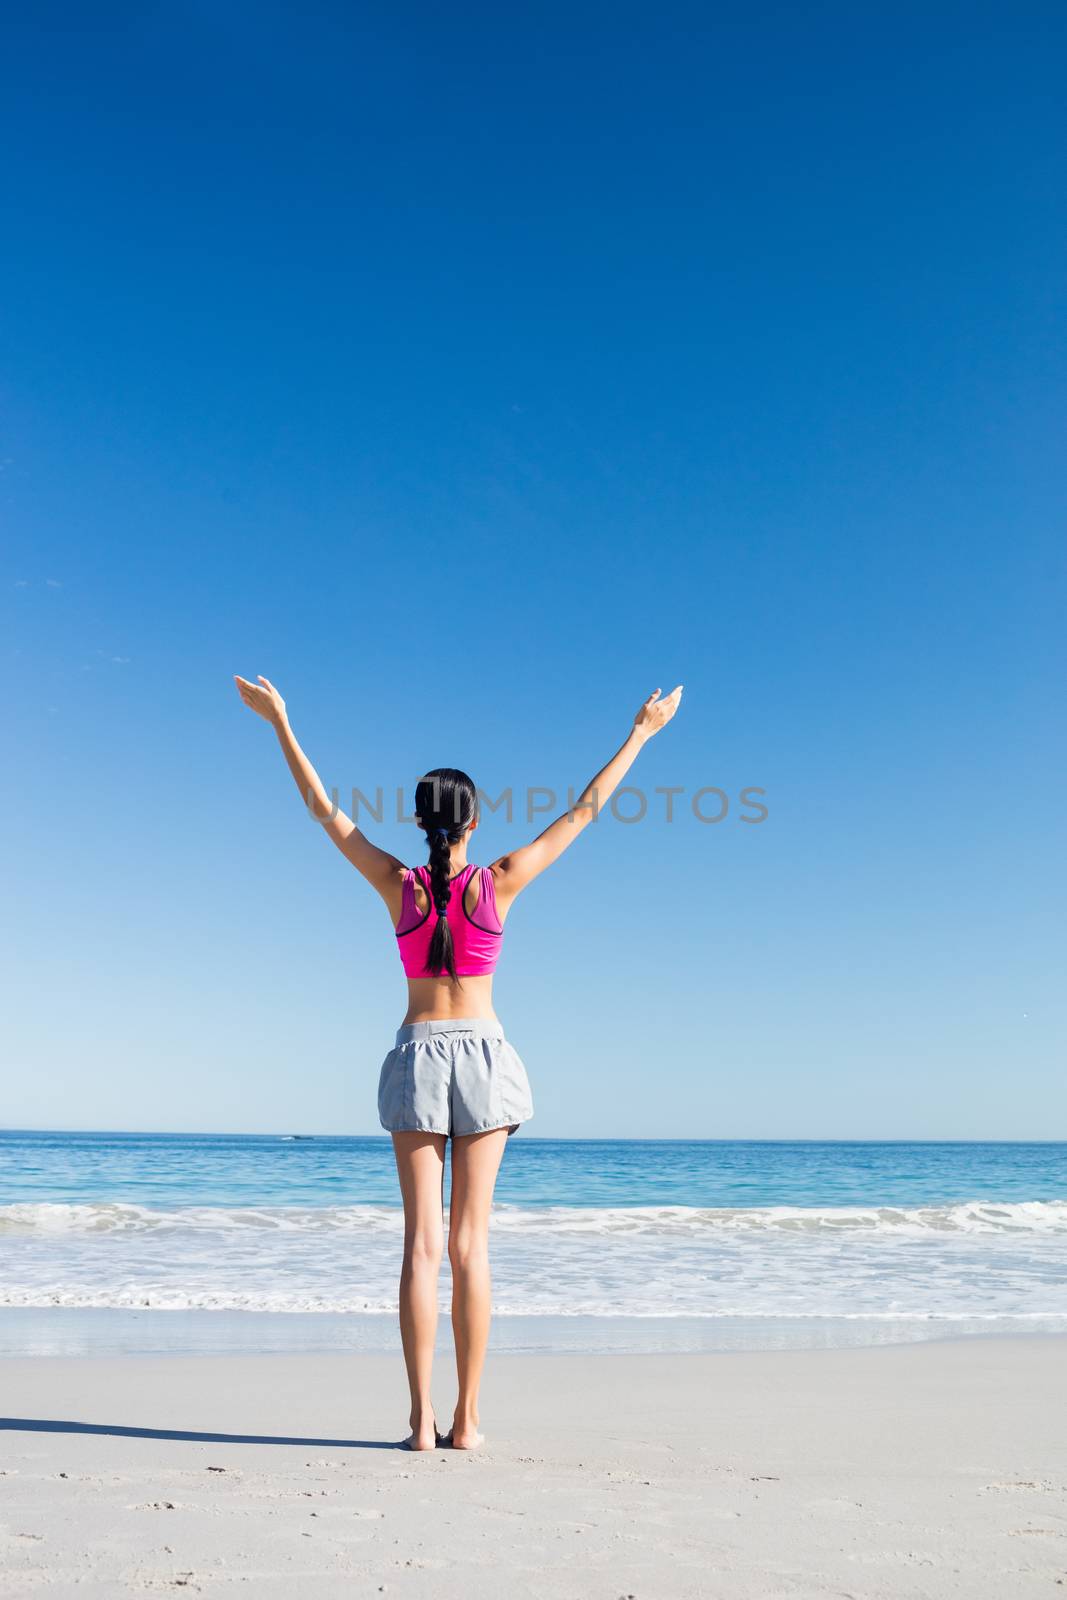 Woman with hands up on the beach by Wavebreakmedia